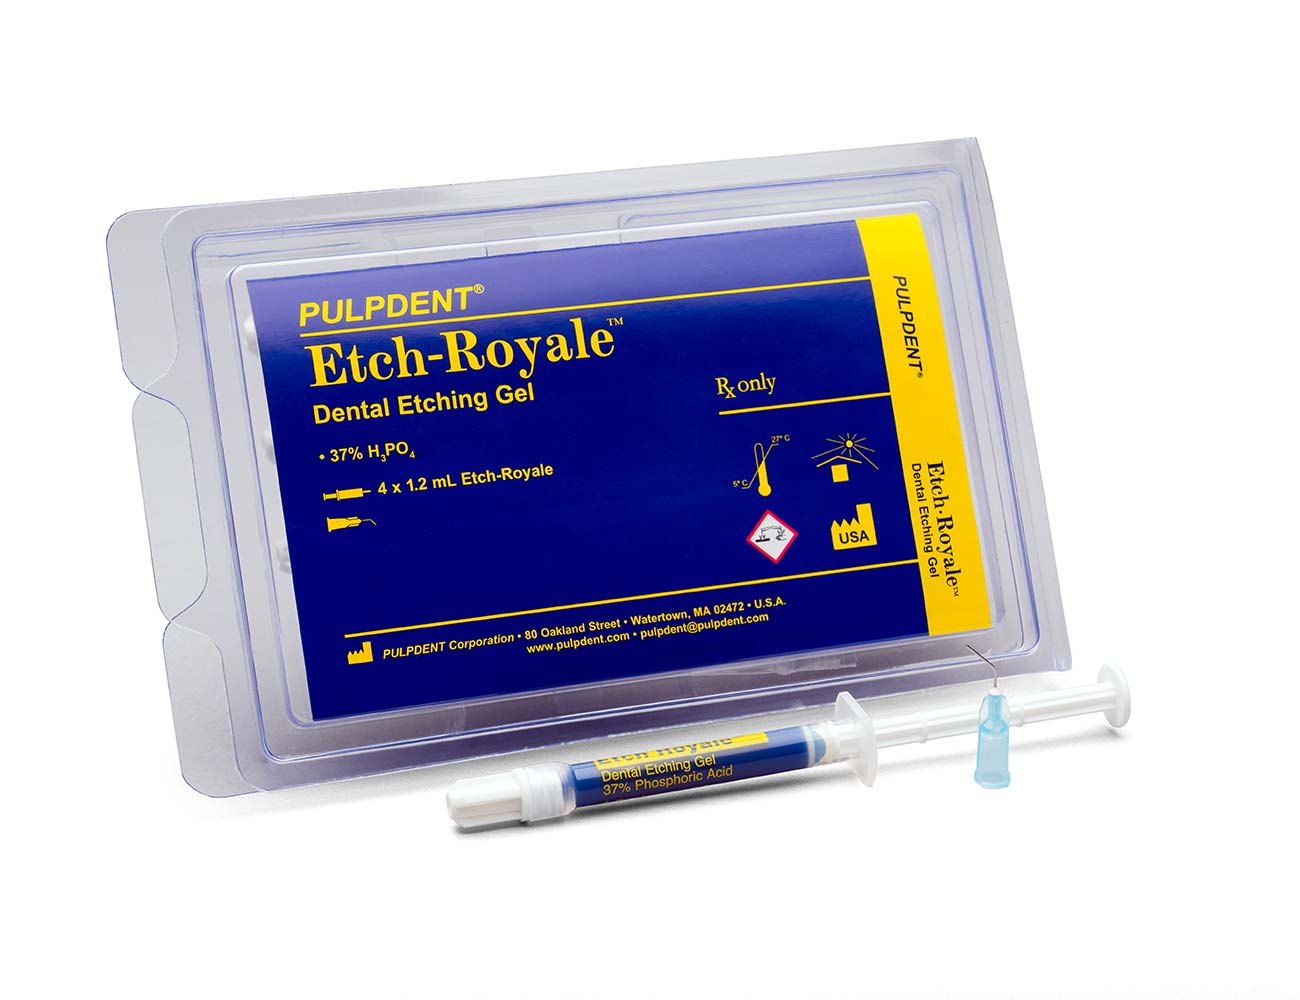 Accessory for Etch-Royale